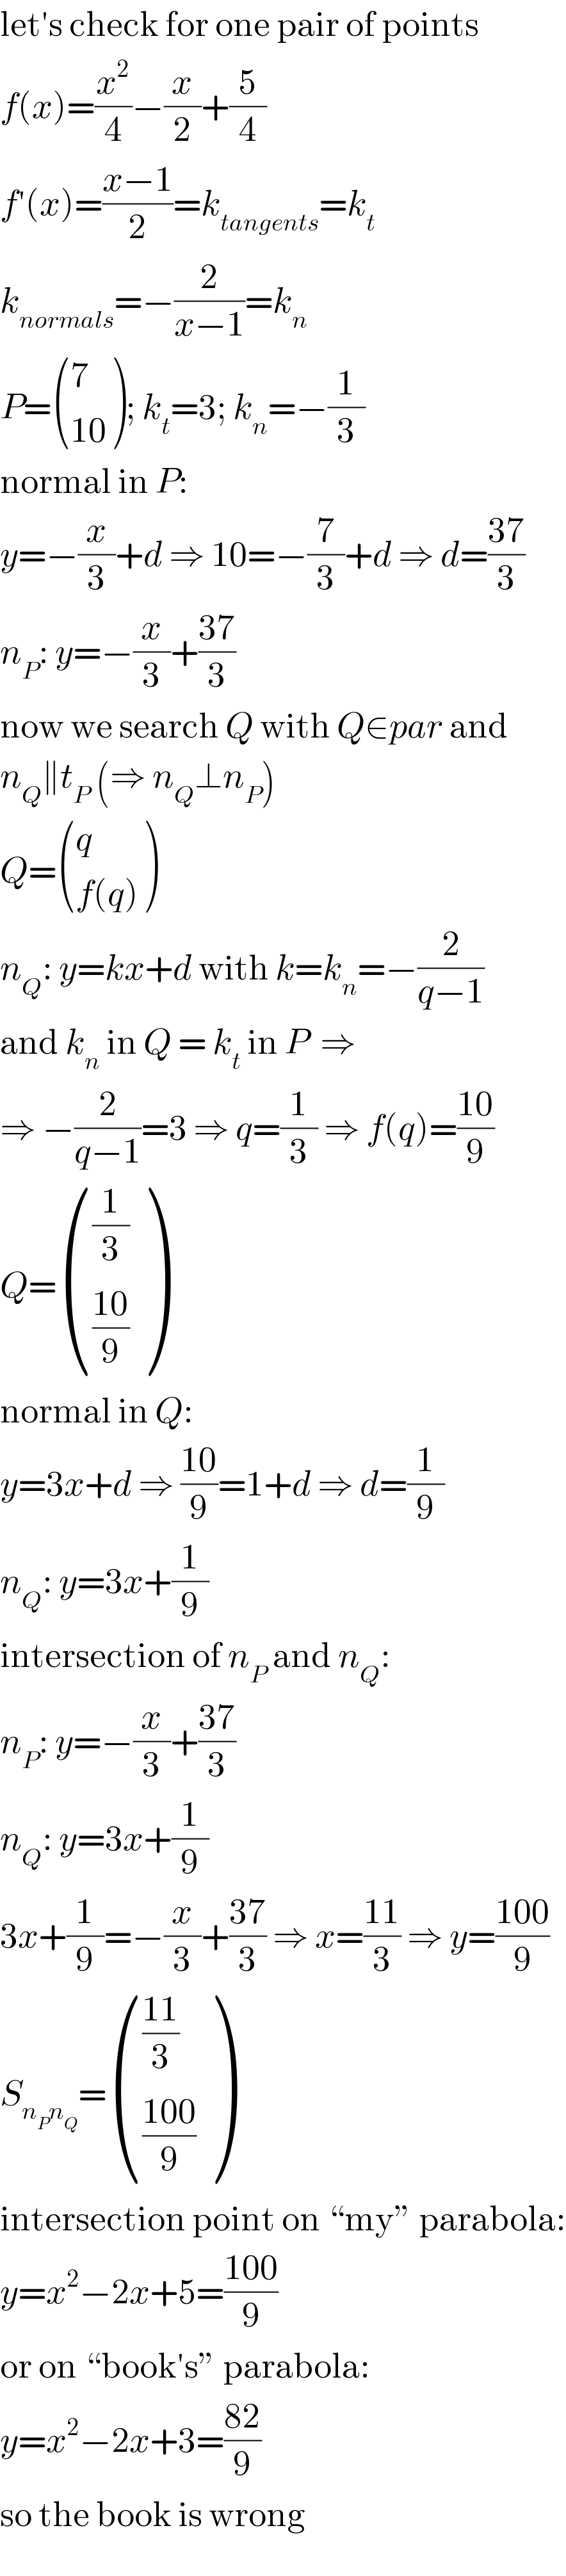 let′s check for one pair of points  f(x)=(x^2 /4)−(x/2)+(5/4)  f′(x)=((x−1)/2)=k_(tangents) =k_t   k_(normals) =−(2/(x−1))=k_n   P= ((7),((10)) ); k_t =3; k_n =−(1/3)  normal in P:  y=−(x/3)+d ⇒ 10=−(7/3)+d ⇒ d=((37)/3)  n_P : y=−(x/3)+((37)/3)  now we search Q with Q∈par and  n_Q ∥t_P  (⇒ n_Q ⊥n_P )  Q= ((q),((f(q))) )  n_Q : y=kx+d with k=k_n =−(2/(q−1))  and k_n  in Q = k_t  in P  ⇒  ⇒ −(2/(q−1))=3 ⇒ q=(1/3) ⇒ f(q)=((10)/9)  Q= (((1/3)),(((10)/9)) )  normal in Q:  y=3x+d ⇒ ((10)/9)=1+d ⇒ d=(1/9)  n_Q : y=3x+(1/9)  intersection of n_P  and n_Q :  n_P : y=−(x/3)+((37)/3)  n_Q : y=3x+(1/9)  3x+(1/9)=−(x/3)+((37)/3) ⇒ x=((11)/3) ⇒ y=((100)/9)  S_(n_P n_Q ) = ((((11)/3)),(((100)/9)) )  intersection point on “my” parabola:  y=x^2 −2x+5=((100)/9)   or on “book′s” parabola:  y=x^2 −2x+3=((82)/9)  so the book is wrong  